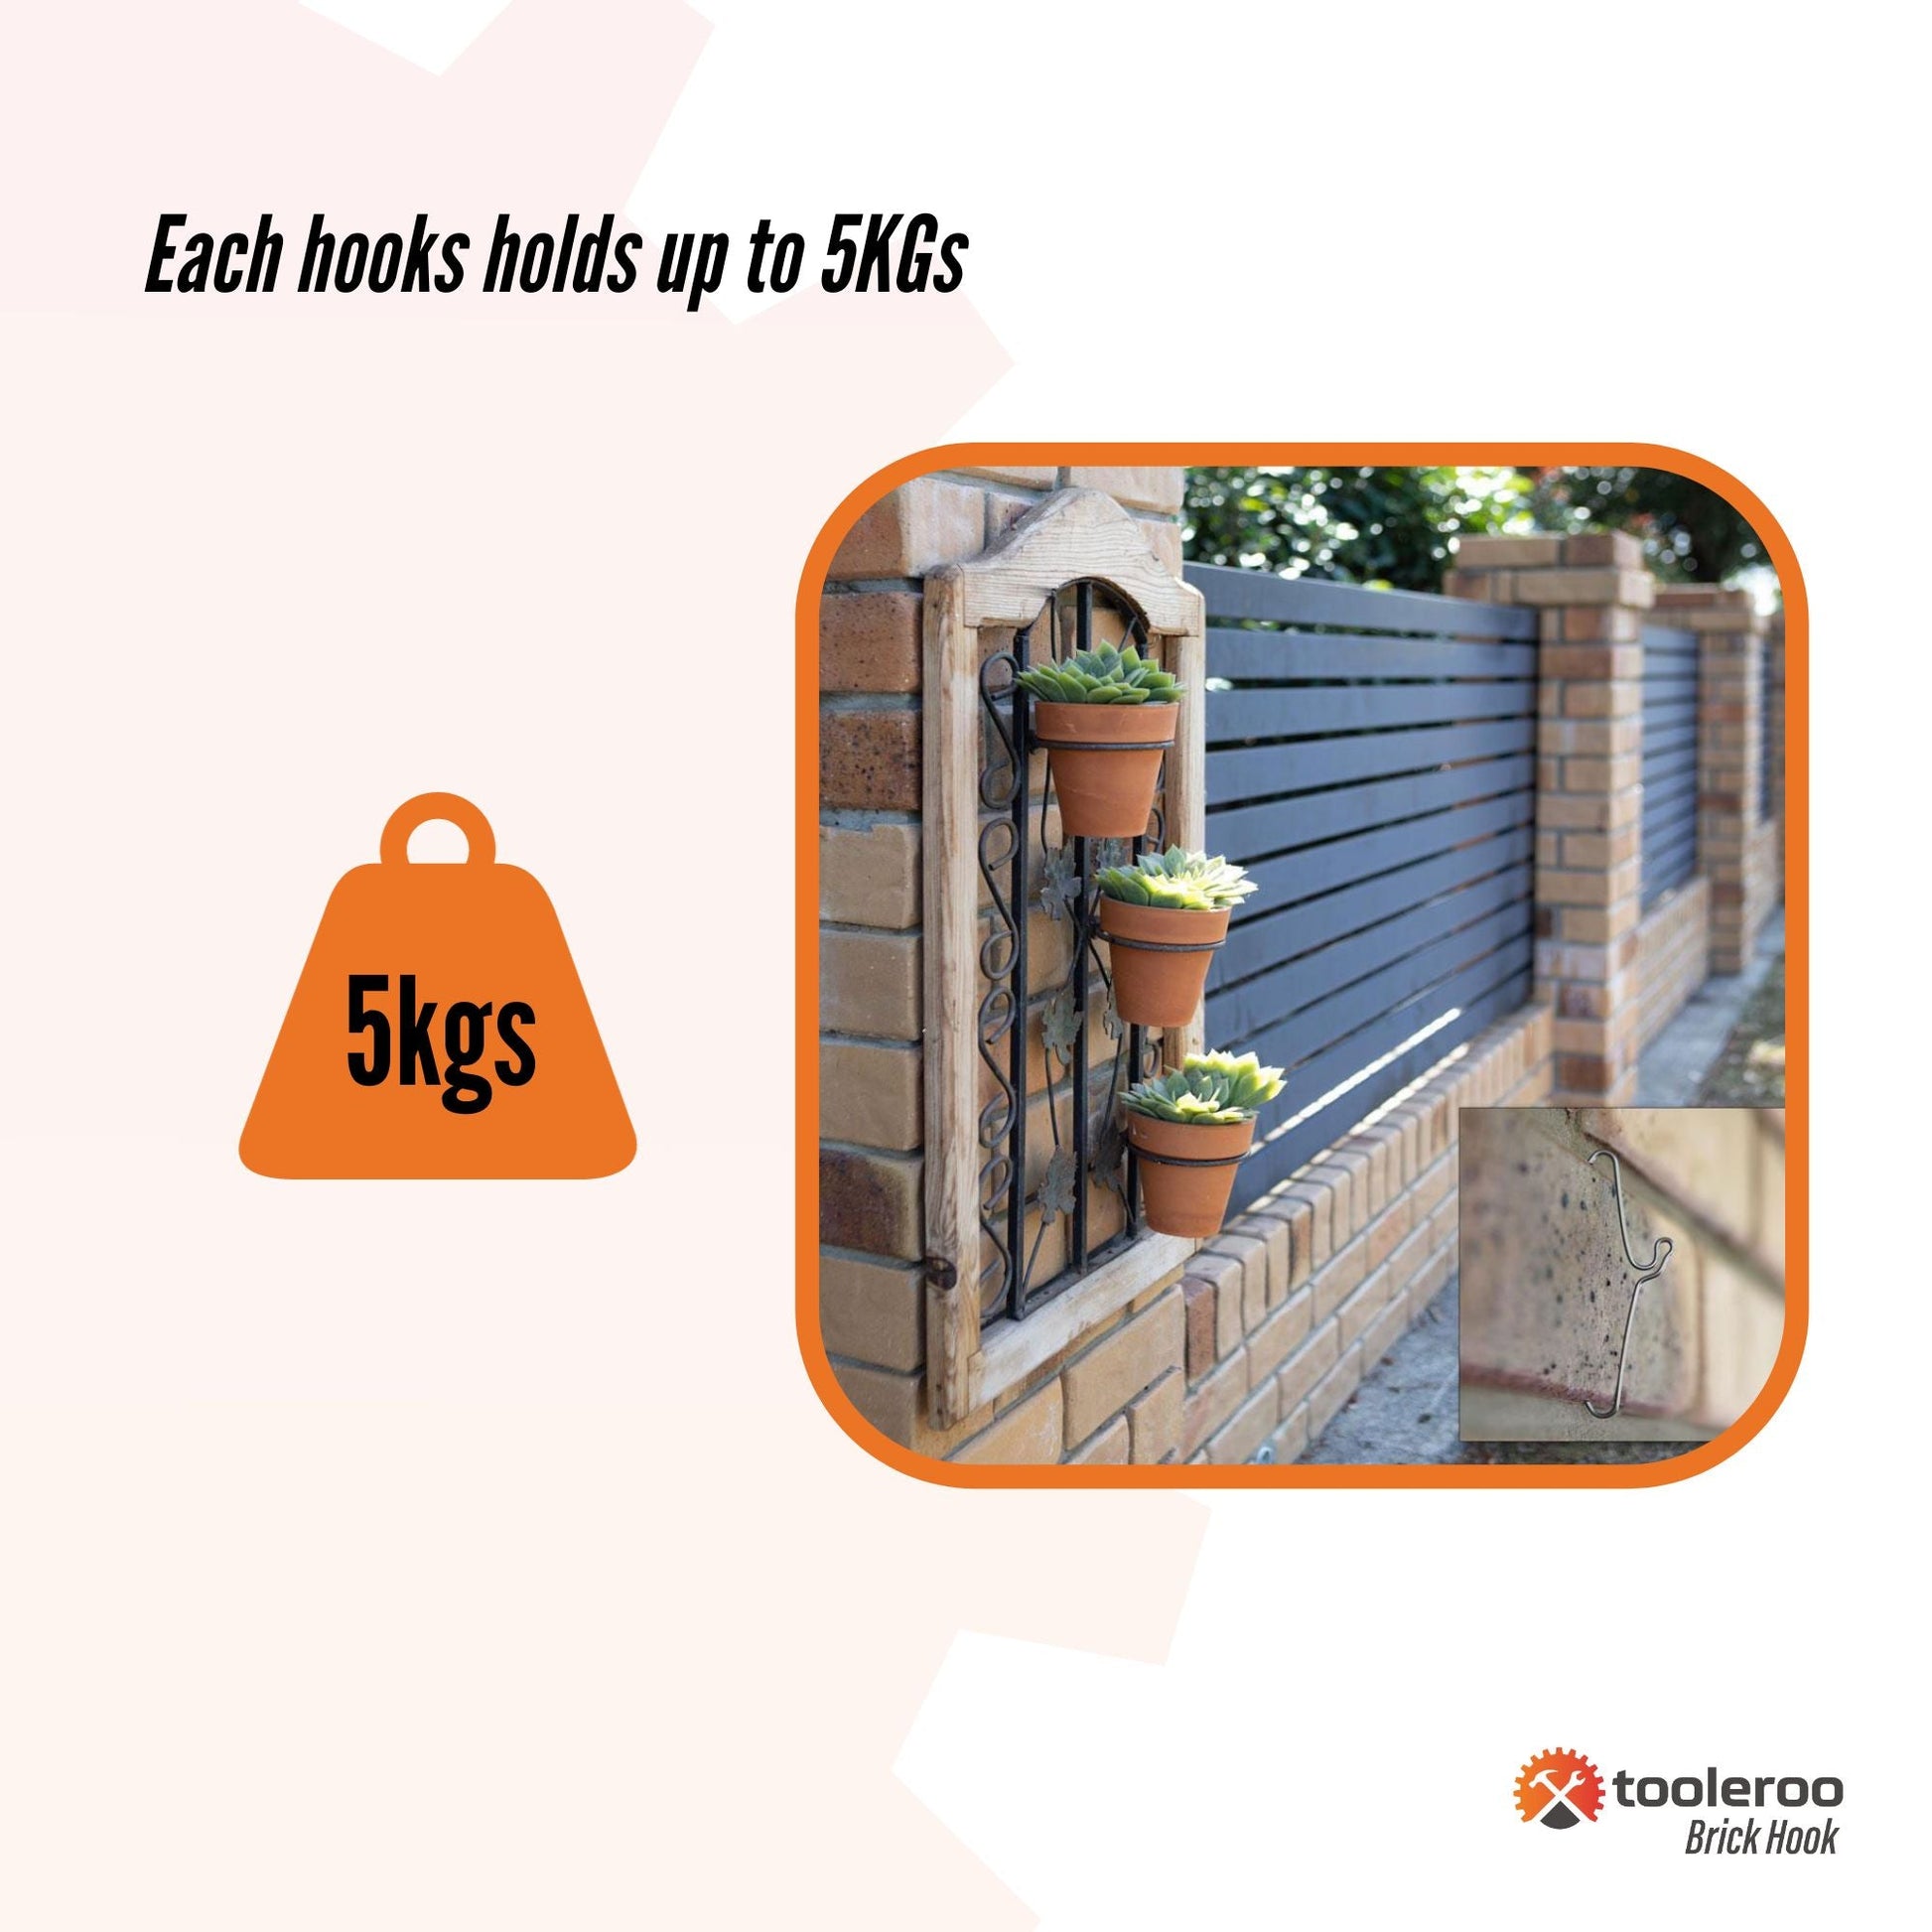 5 Pack 155-165mm (6-6.5") Brick Hooks - Wall Clips Hangers For Pictures Plants